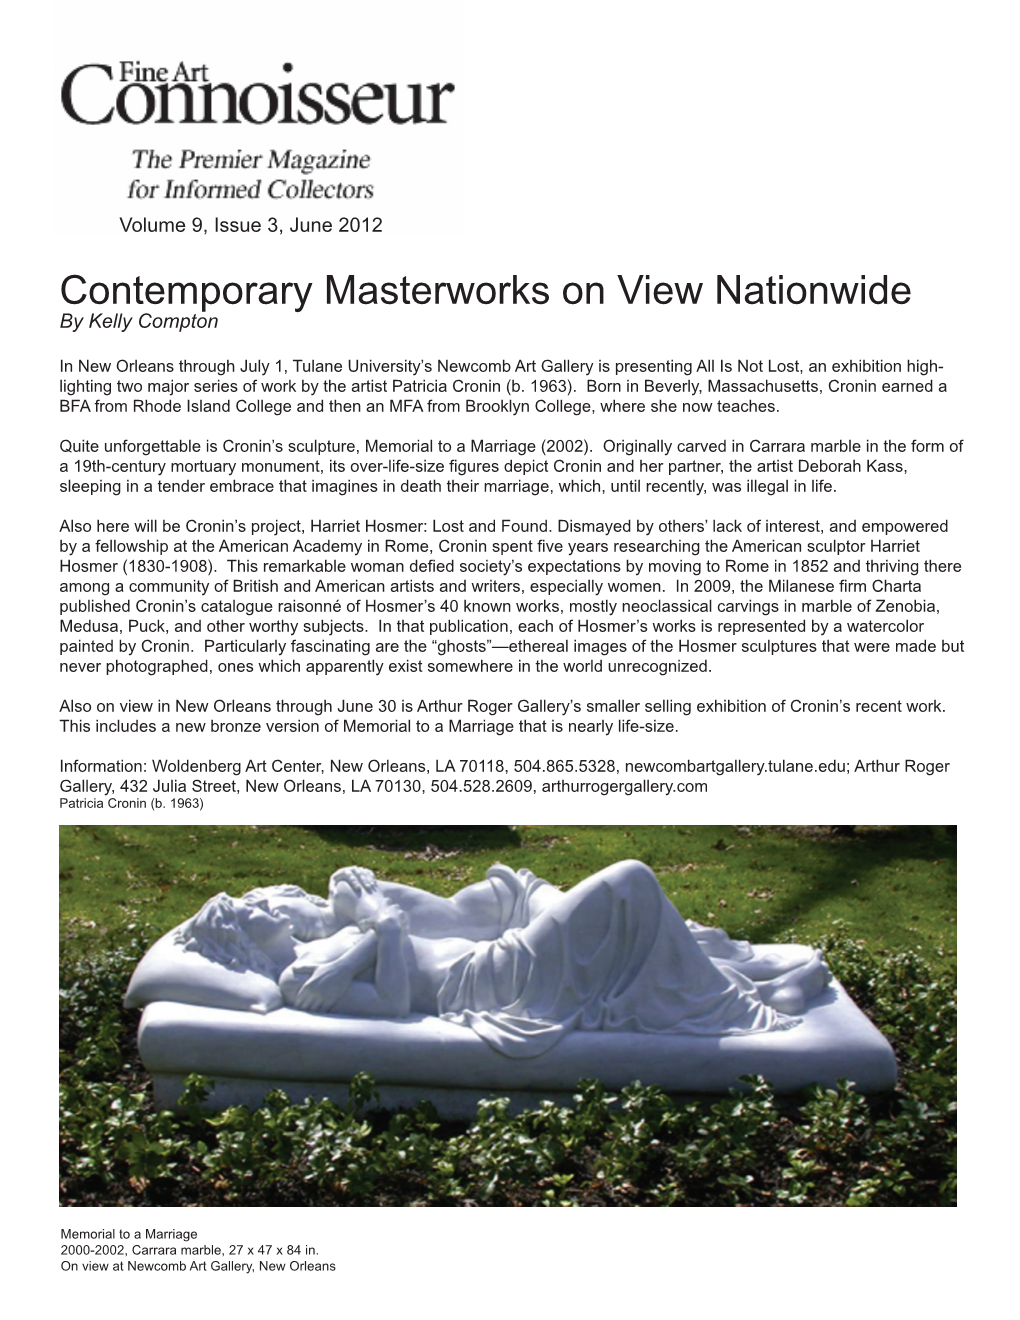 Contemporary Masterworks on View Nationwide by Kelly Compton